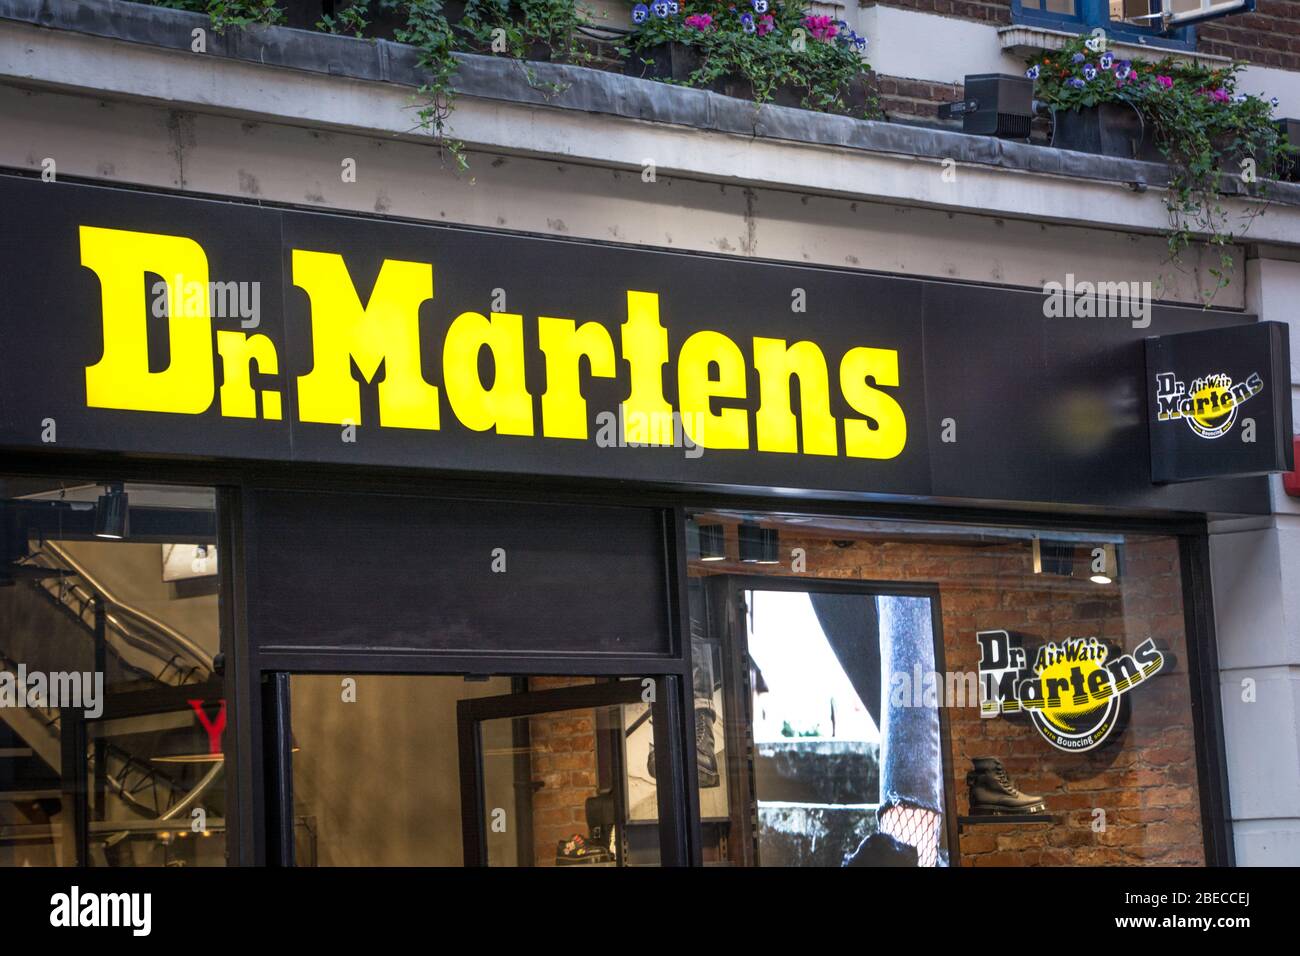 Dr Martens Shop Sign High Resolution Stock Photography and Images - Alamy